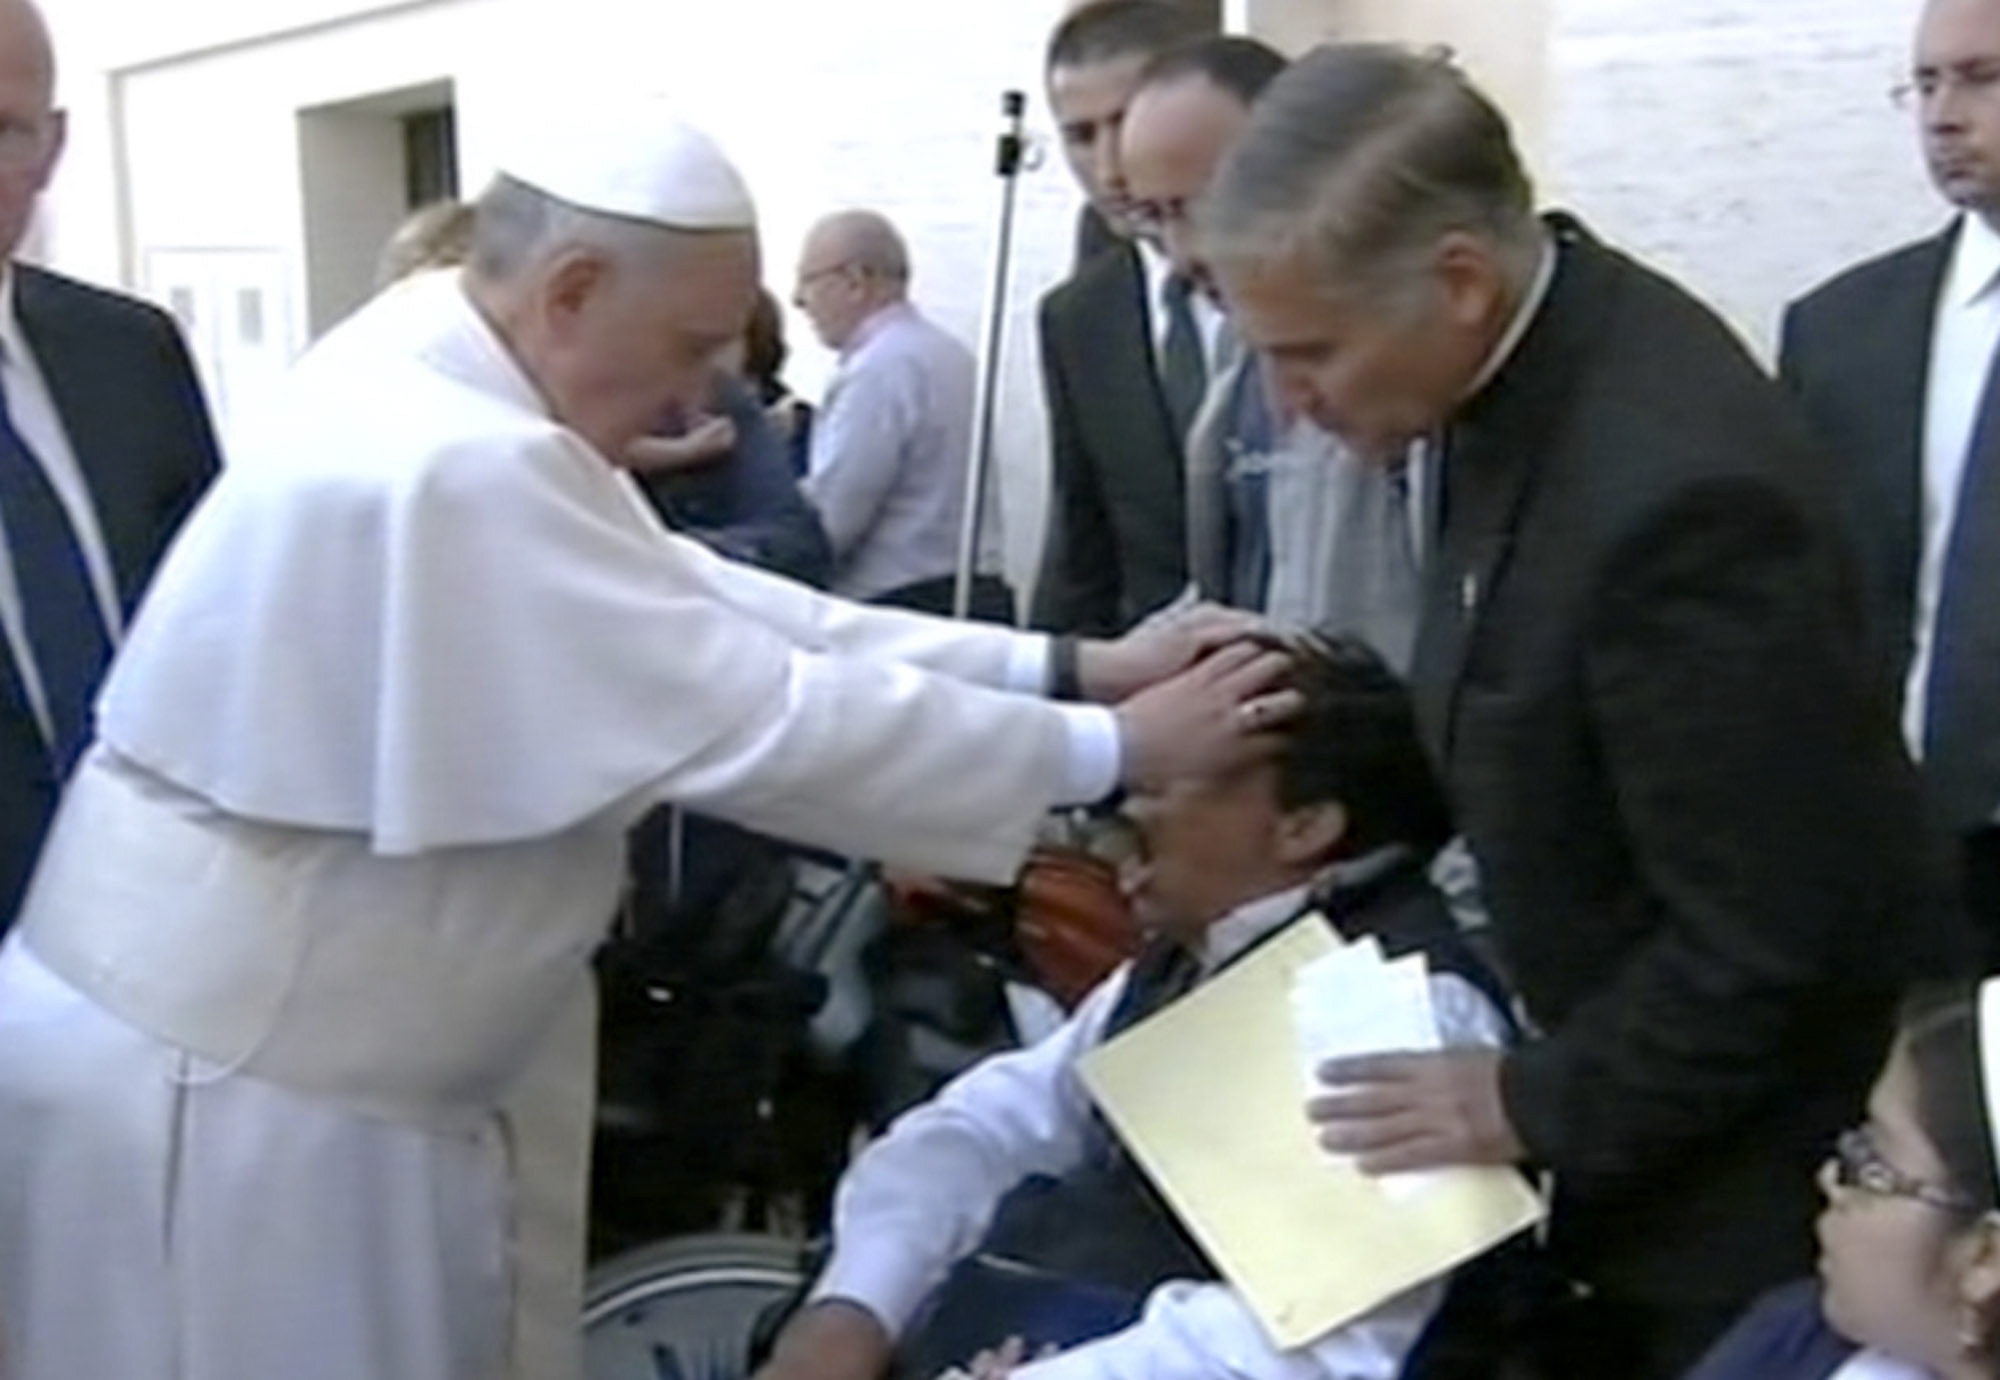 Pope Francis lays his hands on the head of a young man on Sunday after celebrating Mass in St. Peteris Square. The young man heaved deeply a half-dozen times, convulsed and shook, and then slumped in his wheelchair as Francis prayed over him.